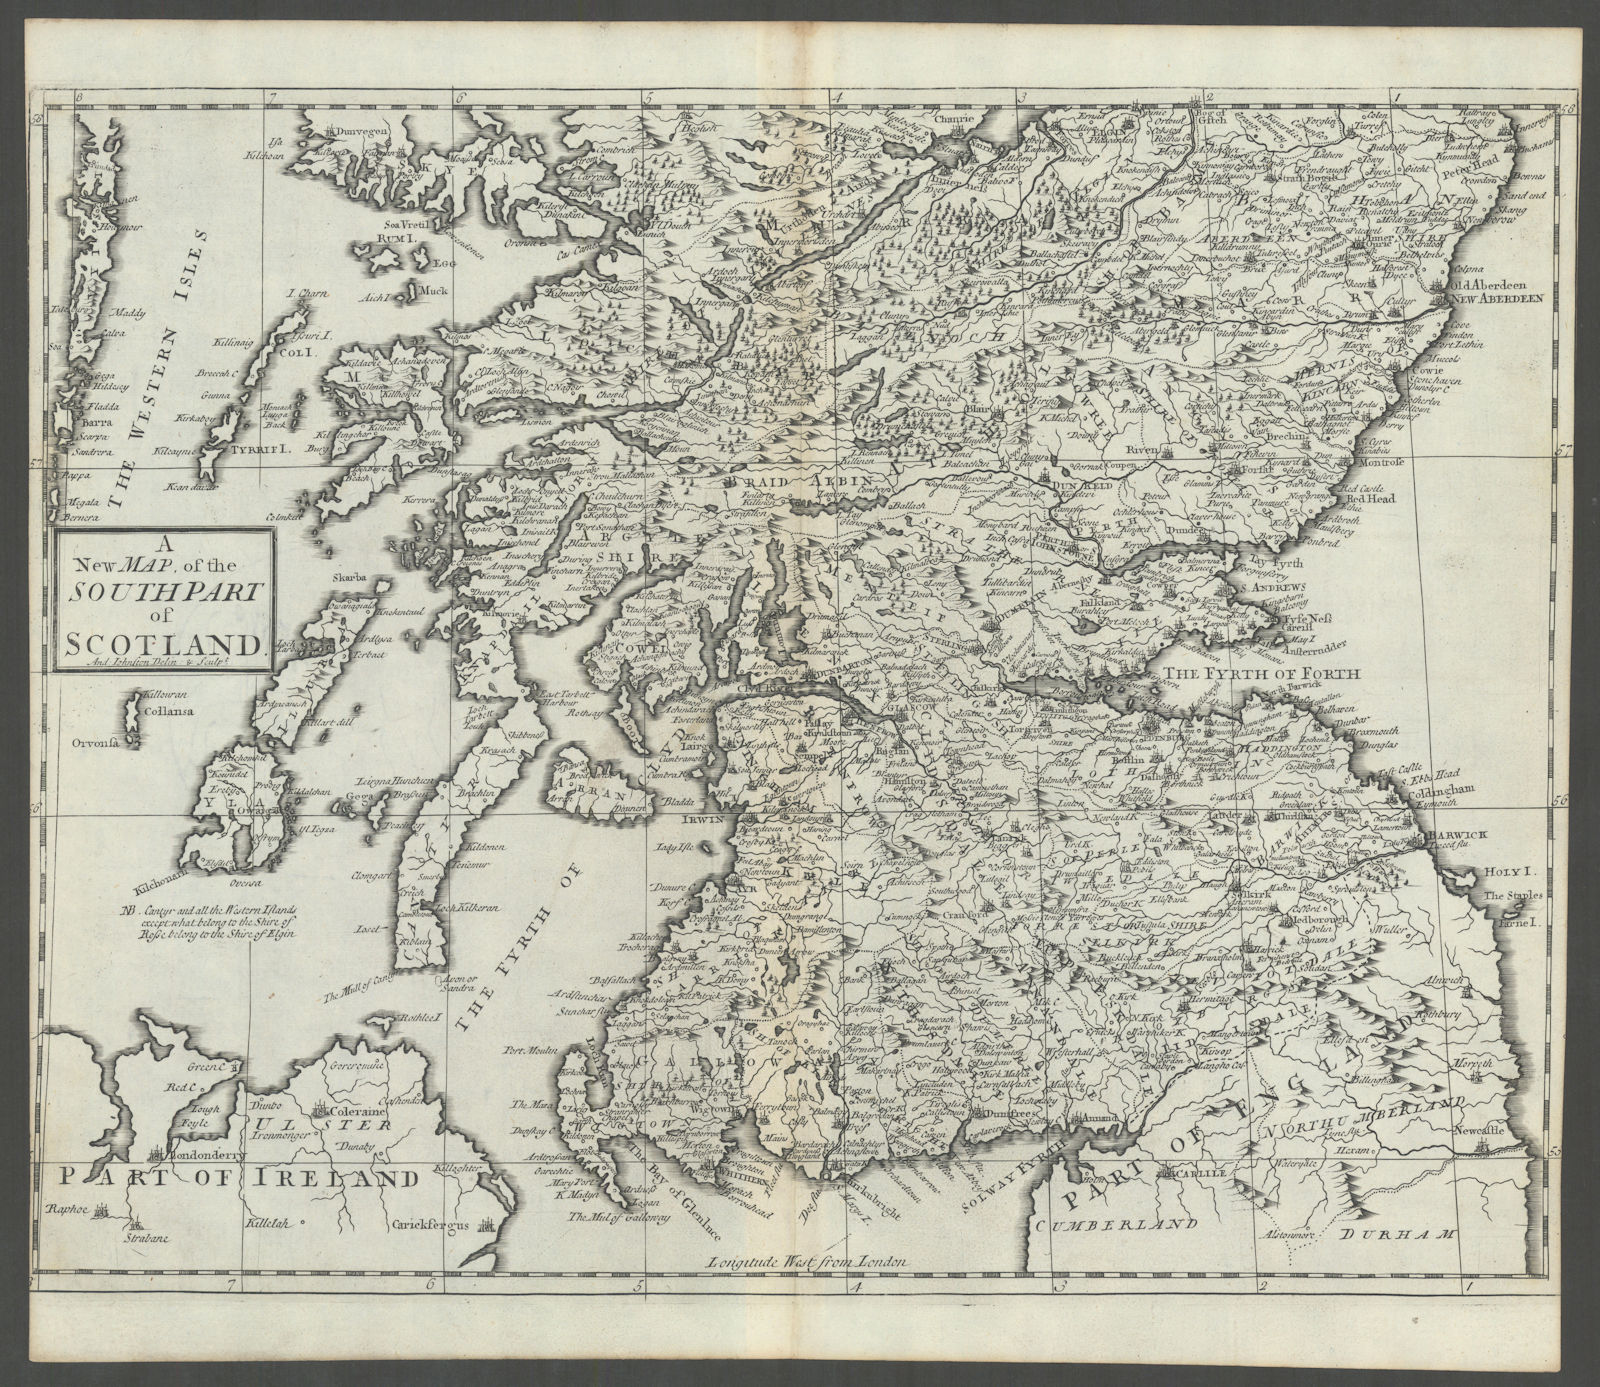 SOUTHERN SCOTLAND by ANDREW JOHNSTON from Camden's Britannia 1722 old map